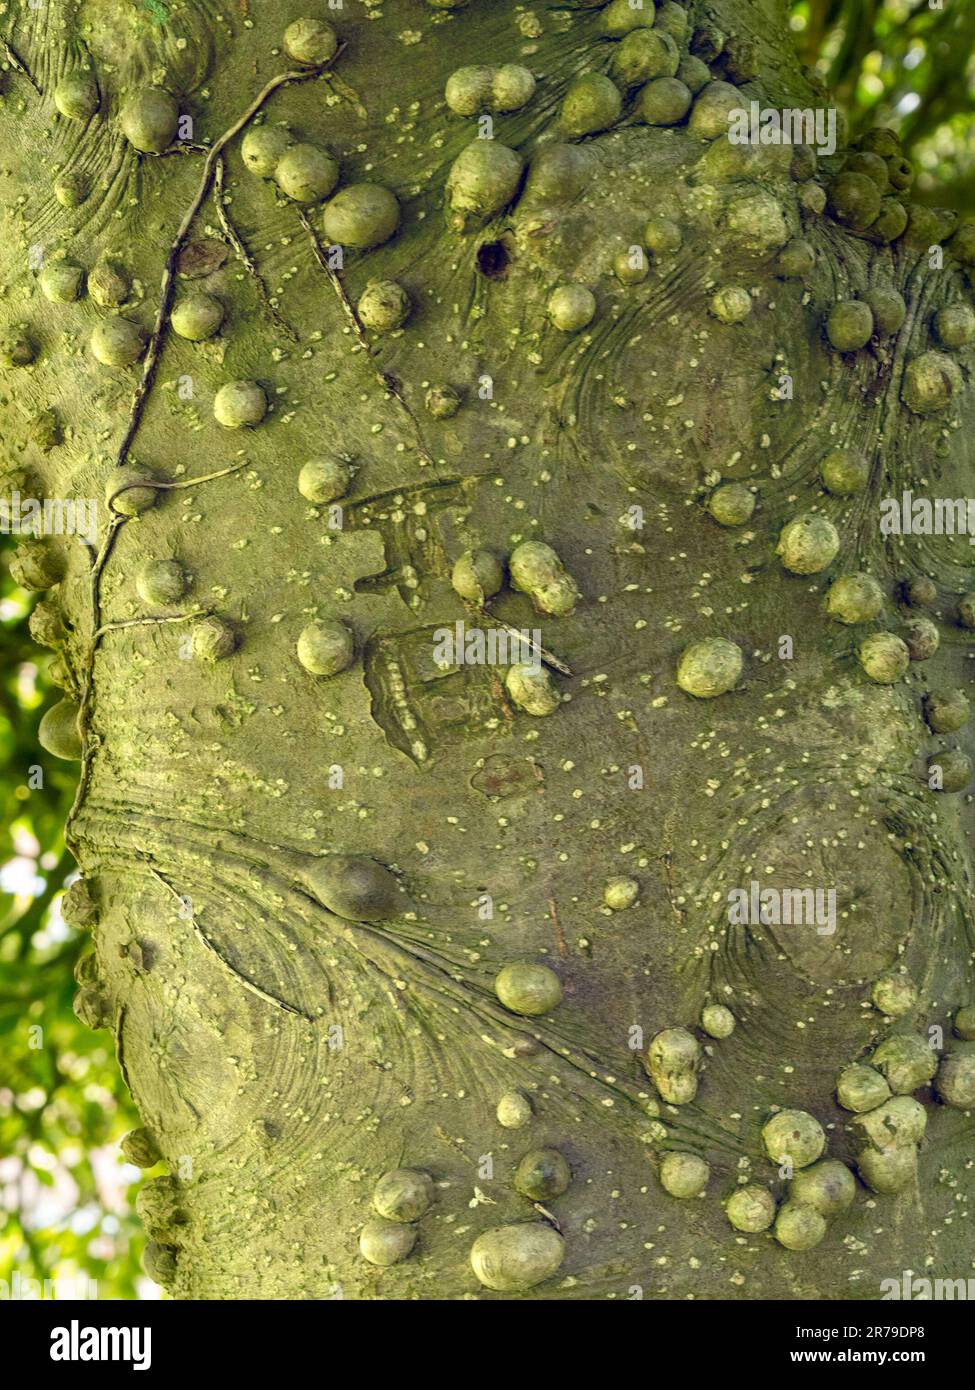 Spherical nodules / extrusions / Sphaeroblast burrs on holly tree trunk, Leicestershire, England, UK Stock Photo